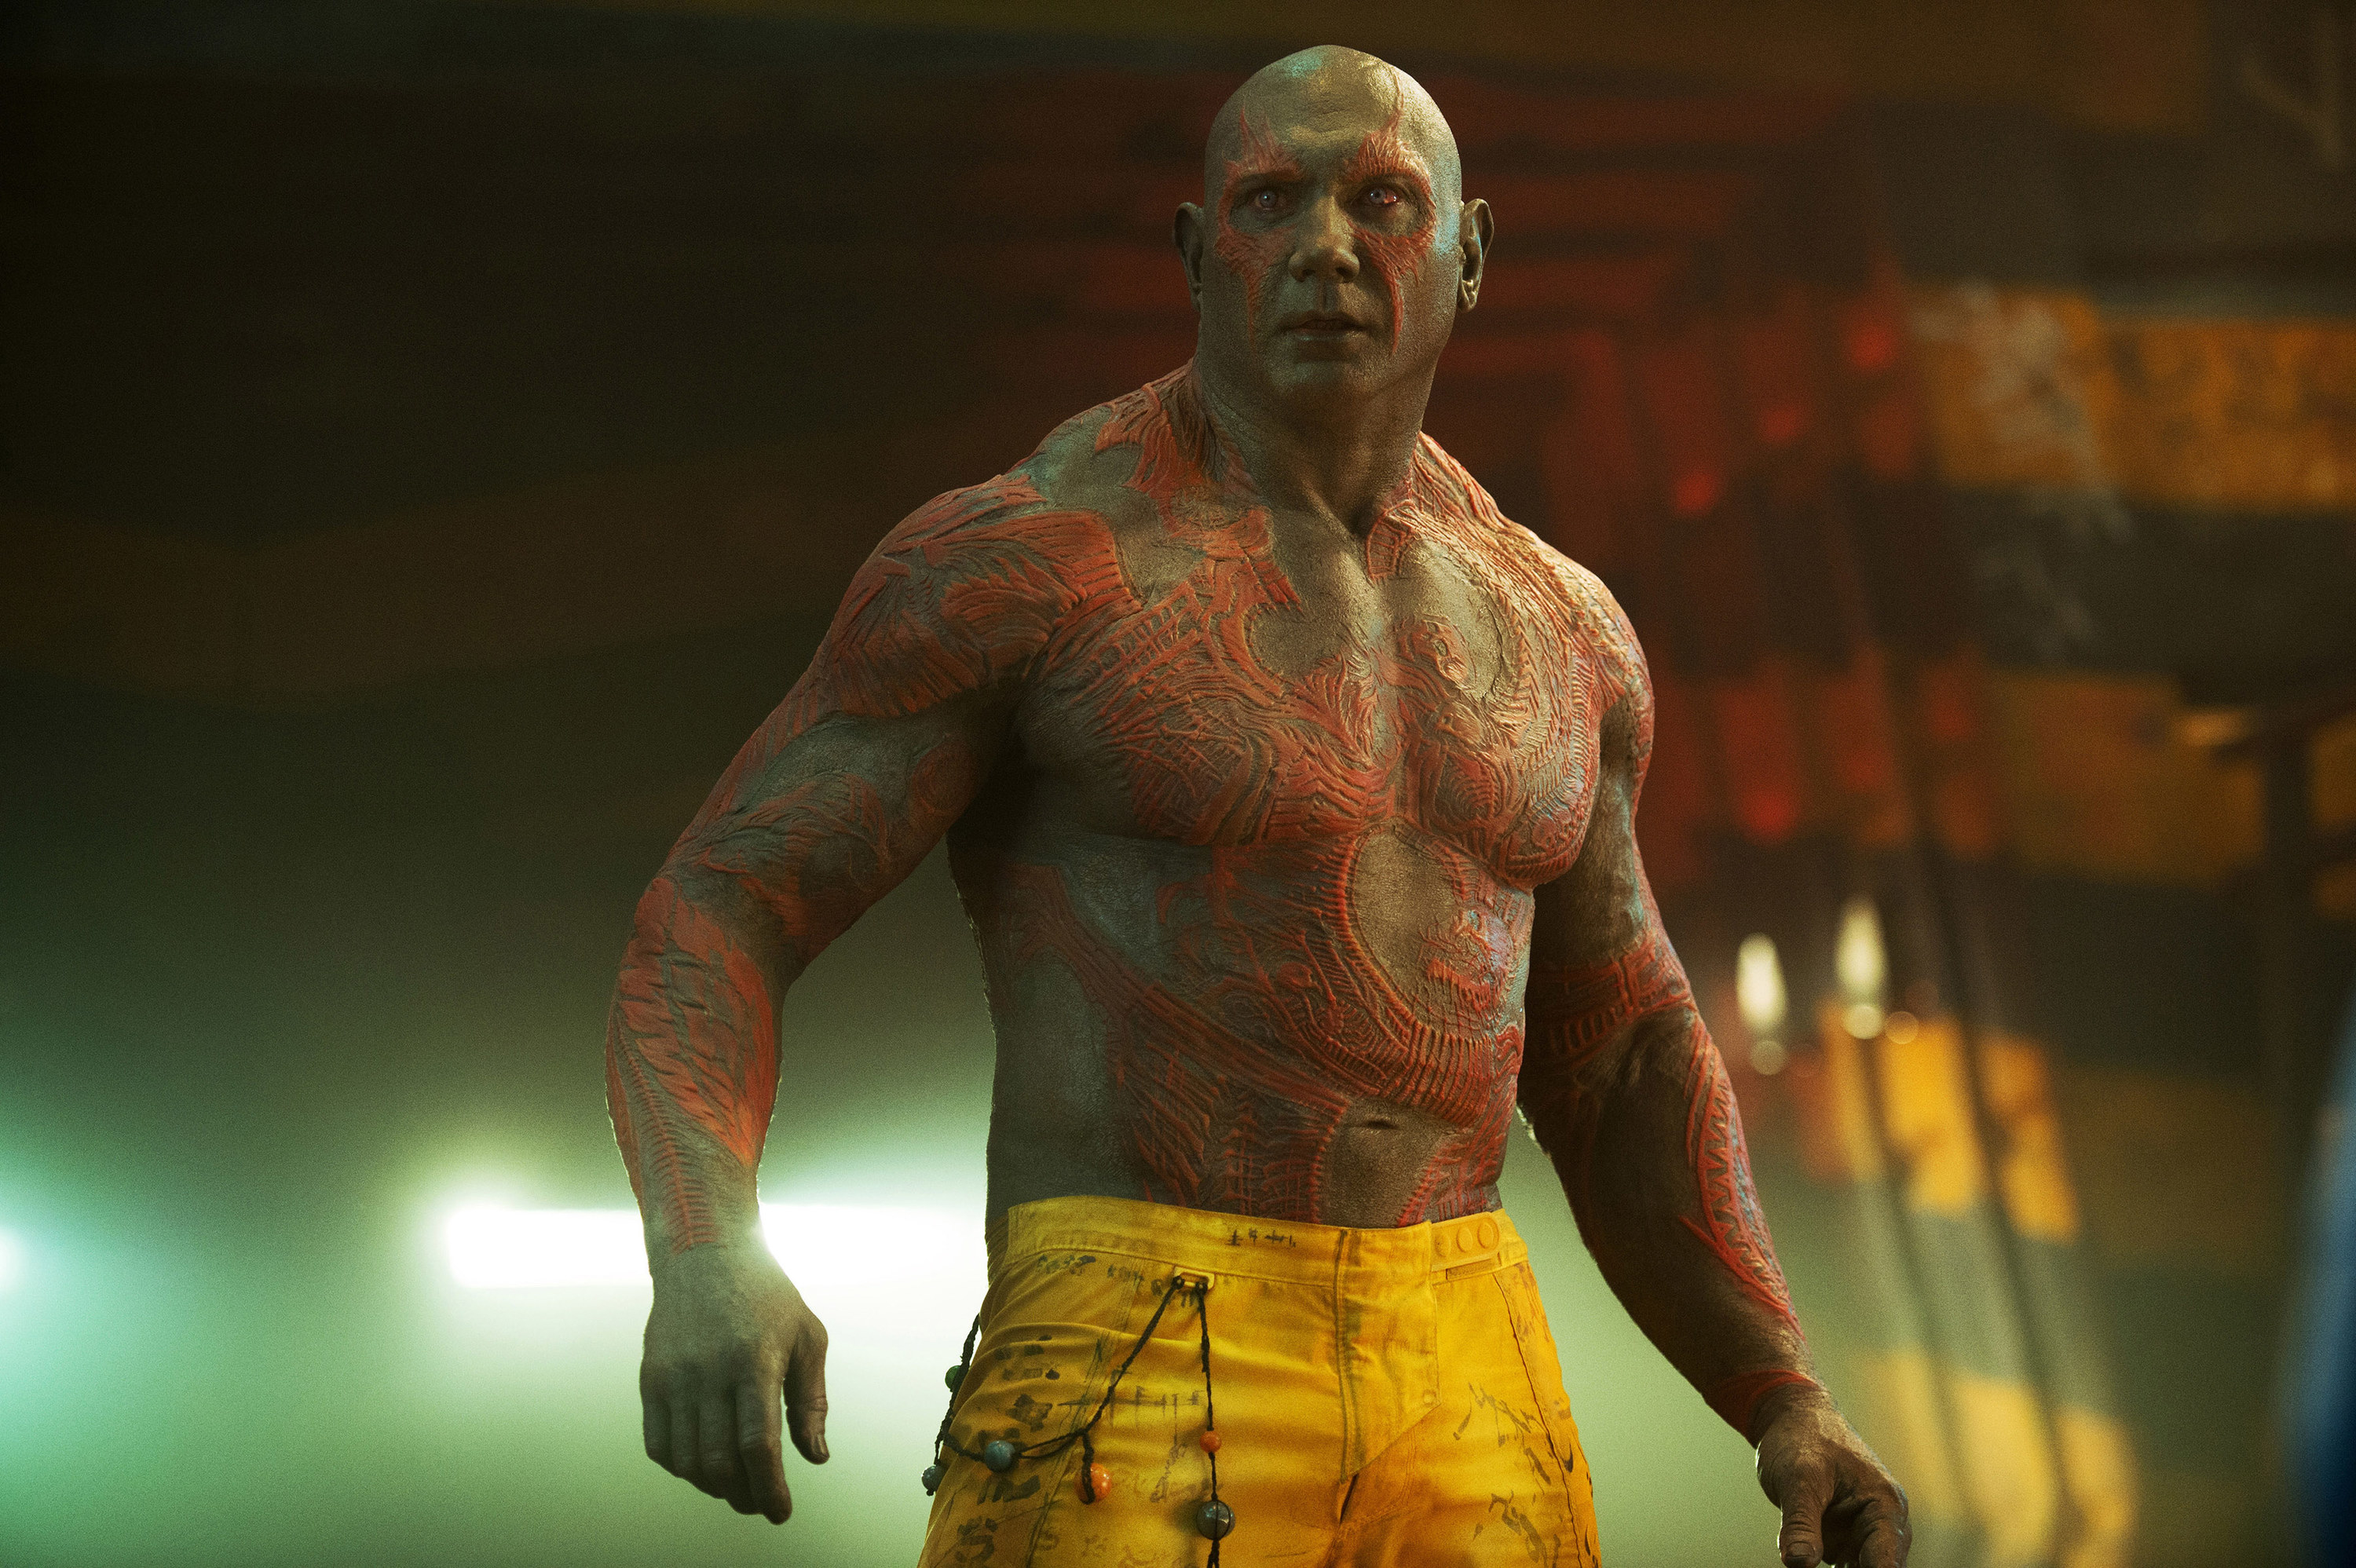 wearing his prison uniform, Drax prepares for a fight